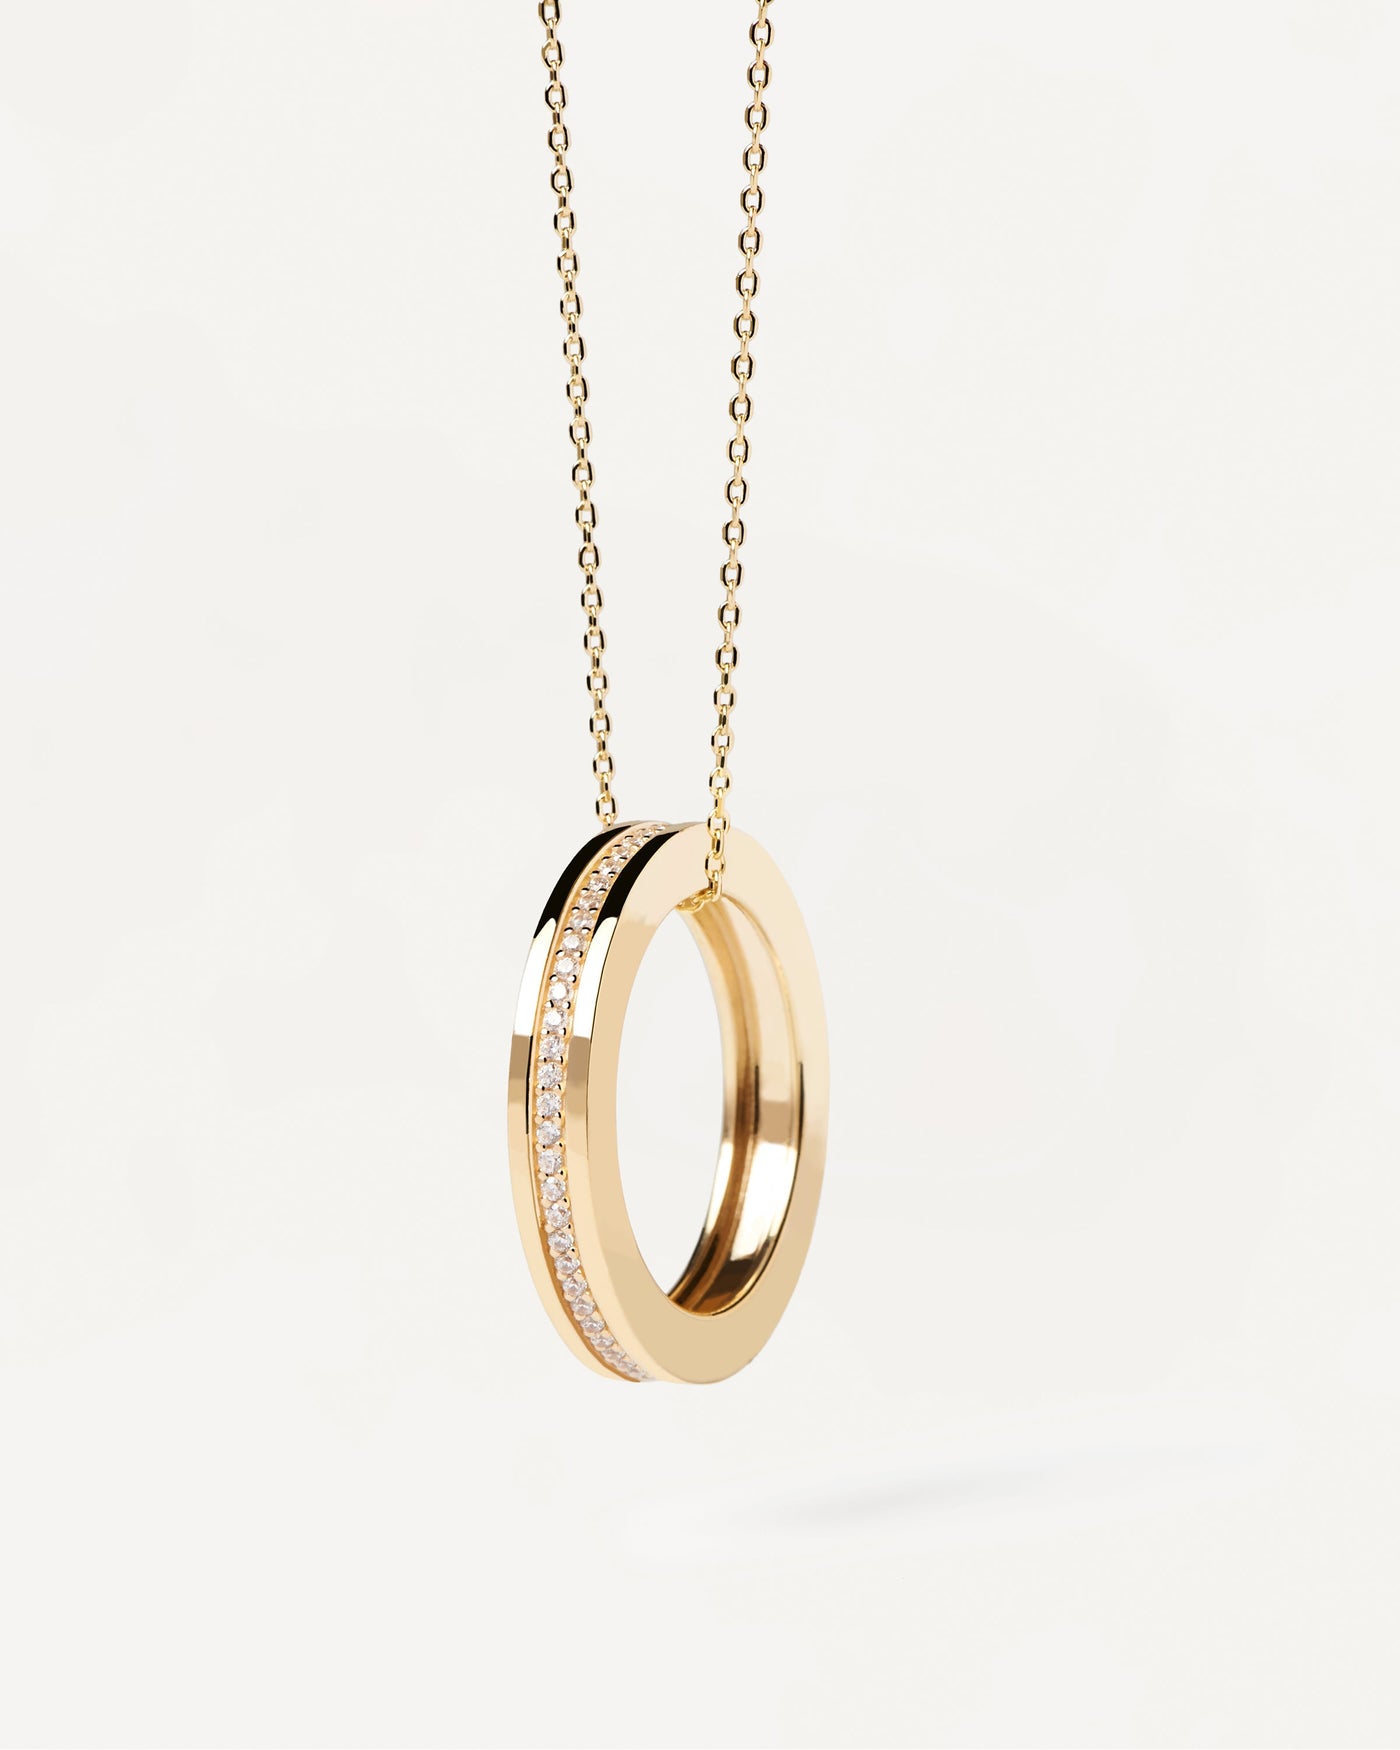 2023 Selection | Infinity Necklace. Gold-plated necklace with ring pendant. Get the latest arrival from PDPAOLA. Place your order safely and get this Best Seller. Free Shipping.